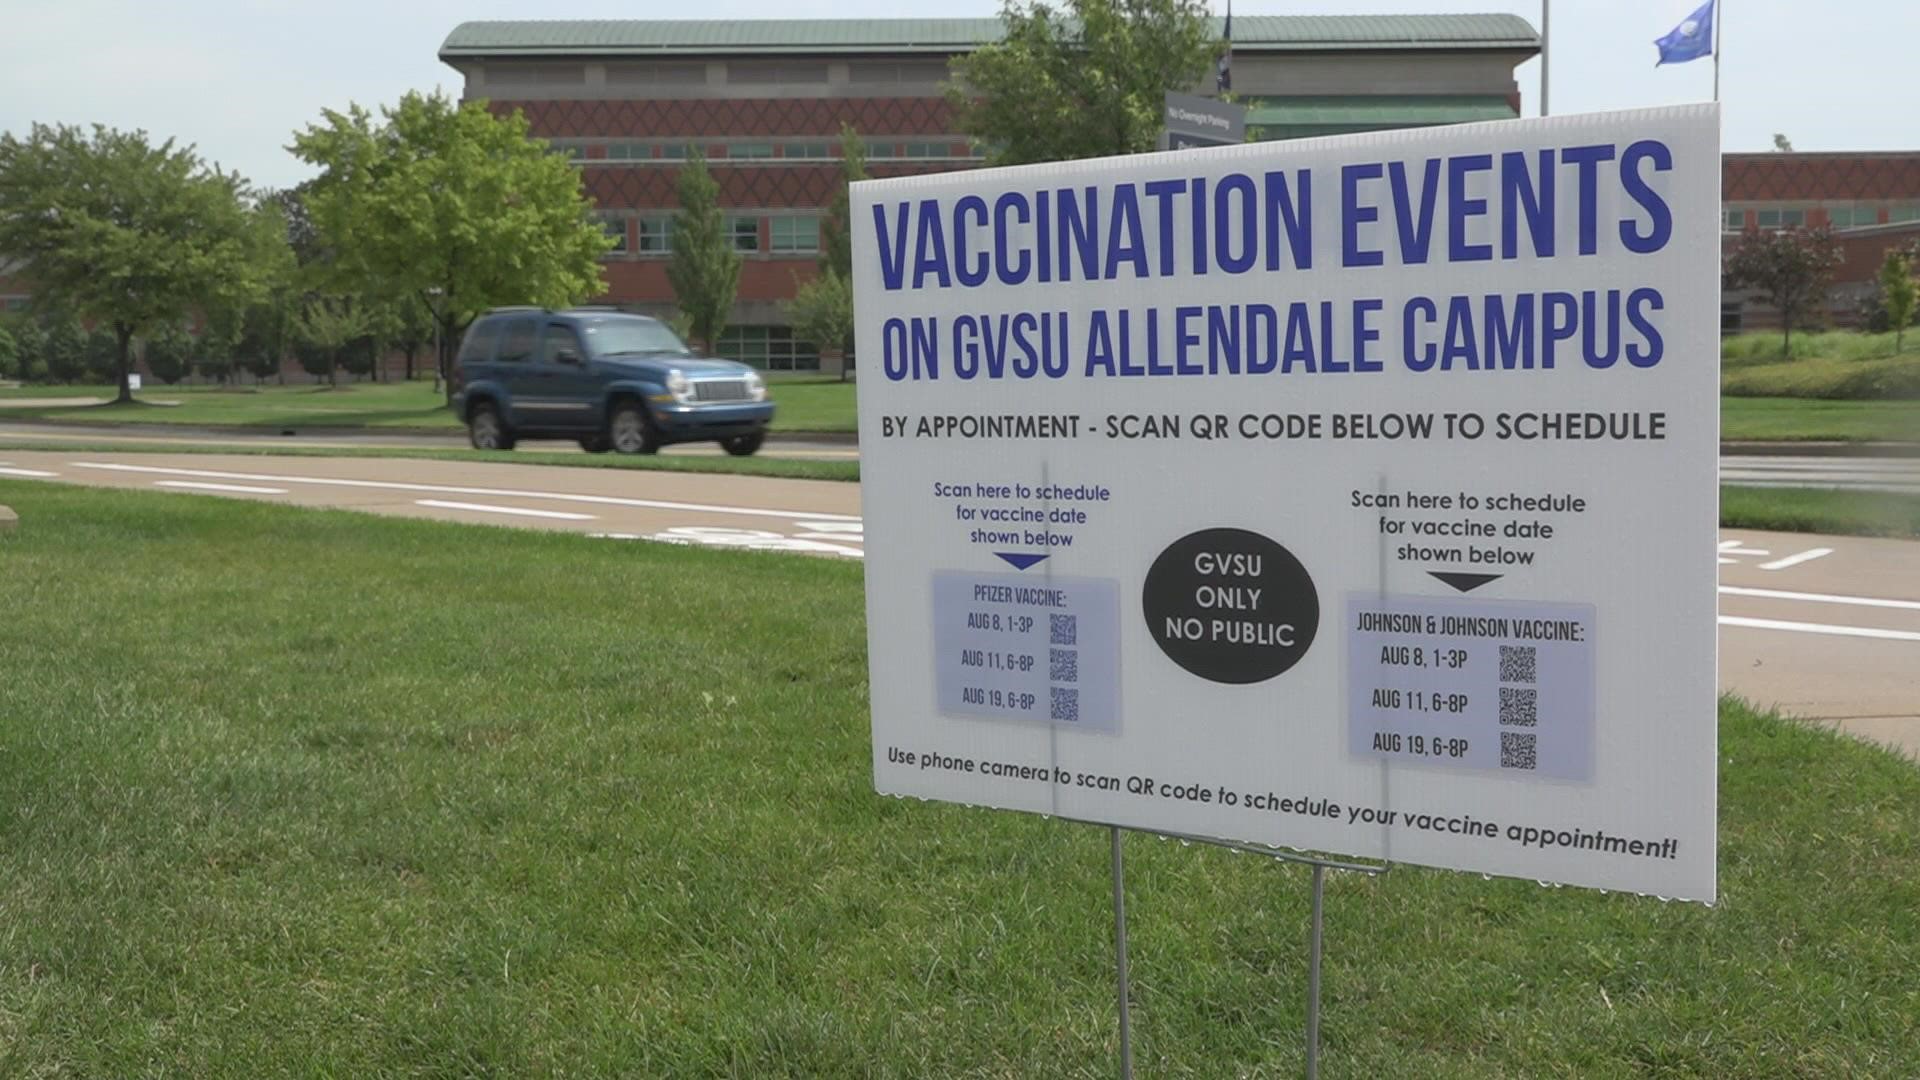 Students and employees at GVSU have until the end of the day (Sept. 30) to get vaccinated against COVID-19 unless they have an approved exemption.